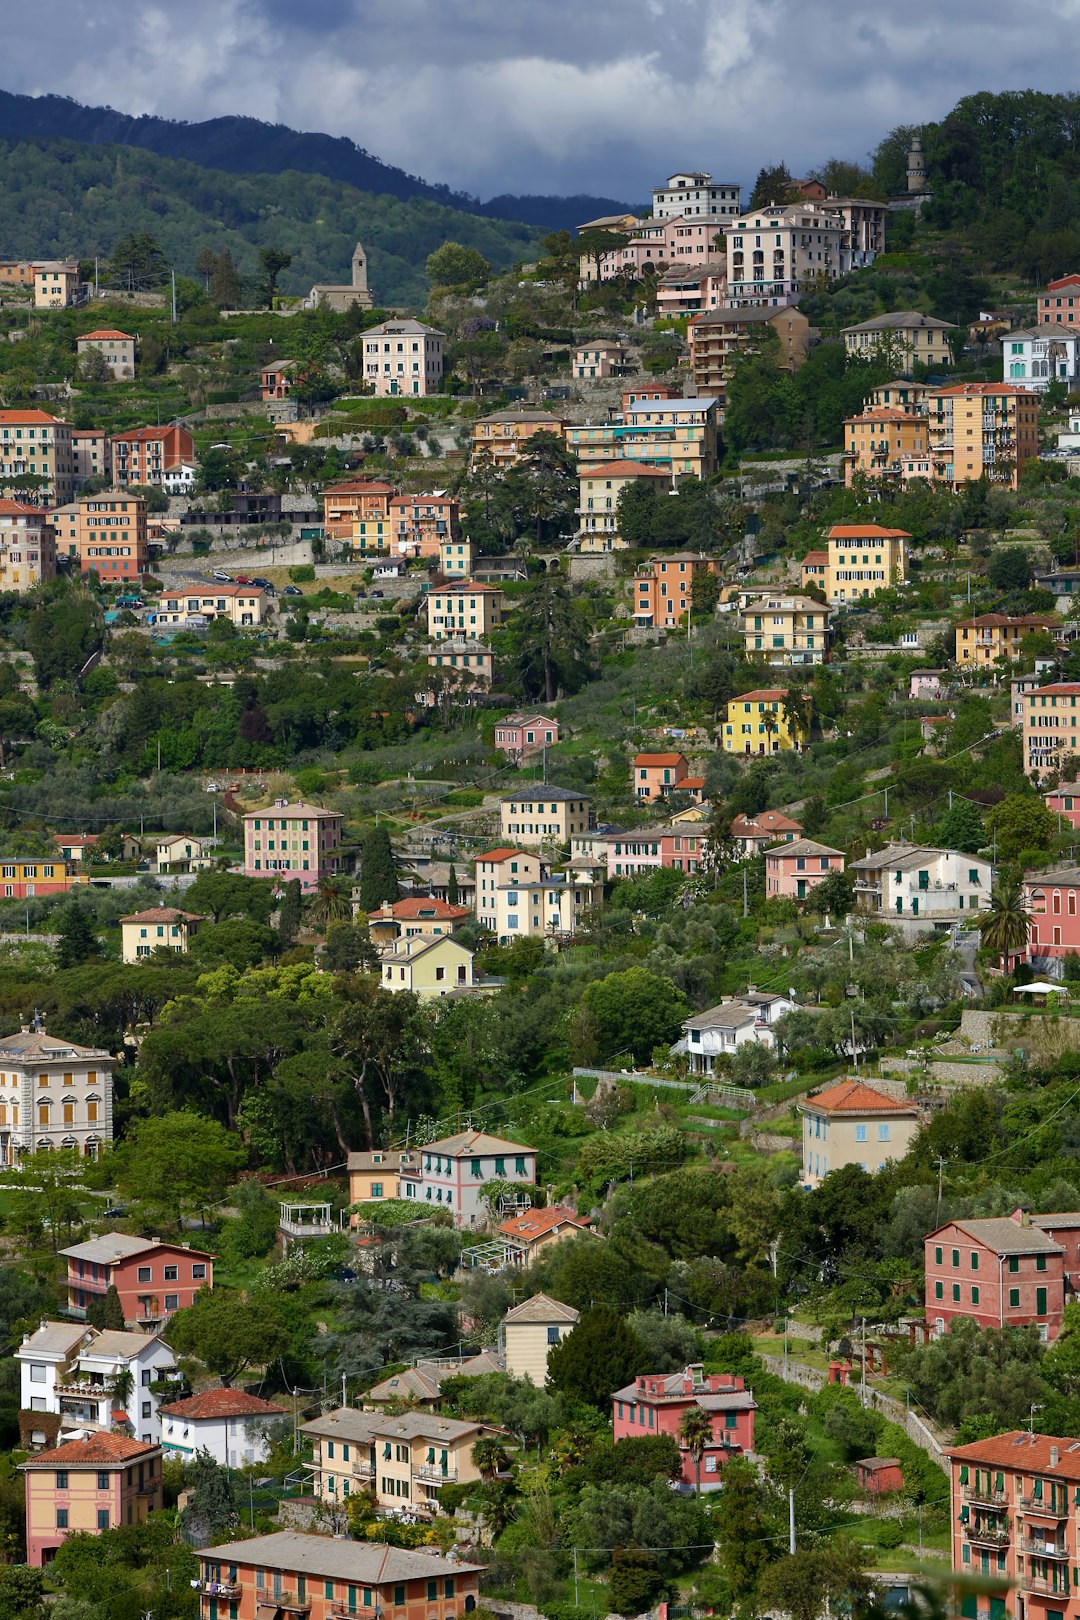 Travel Tips and Stories of Liguria in Italy